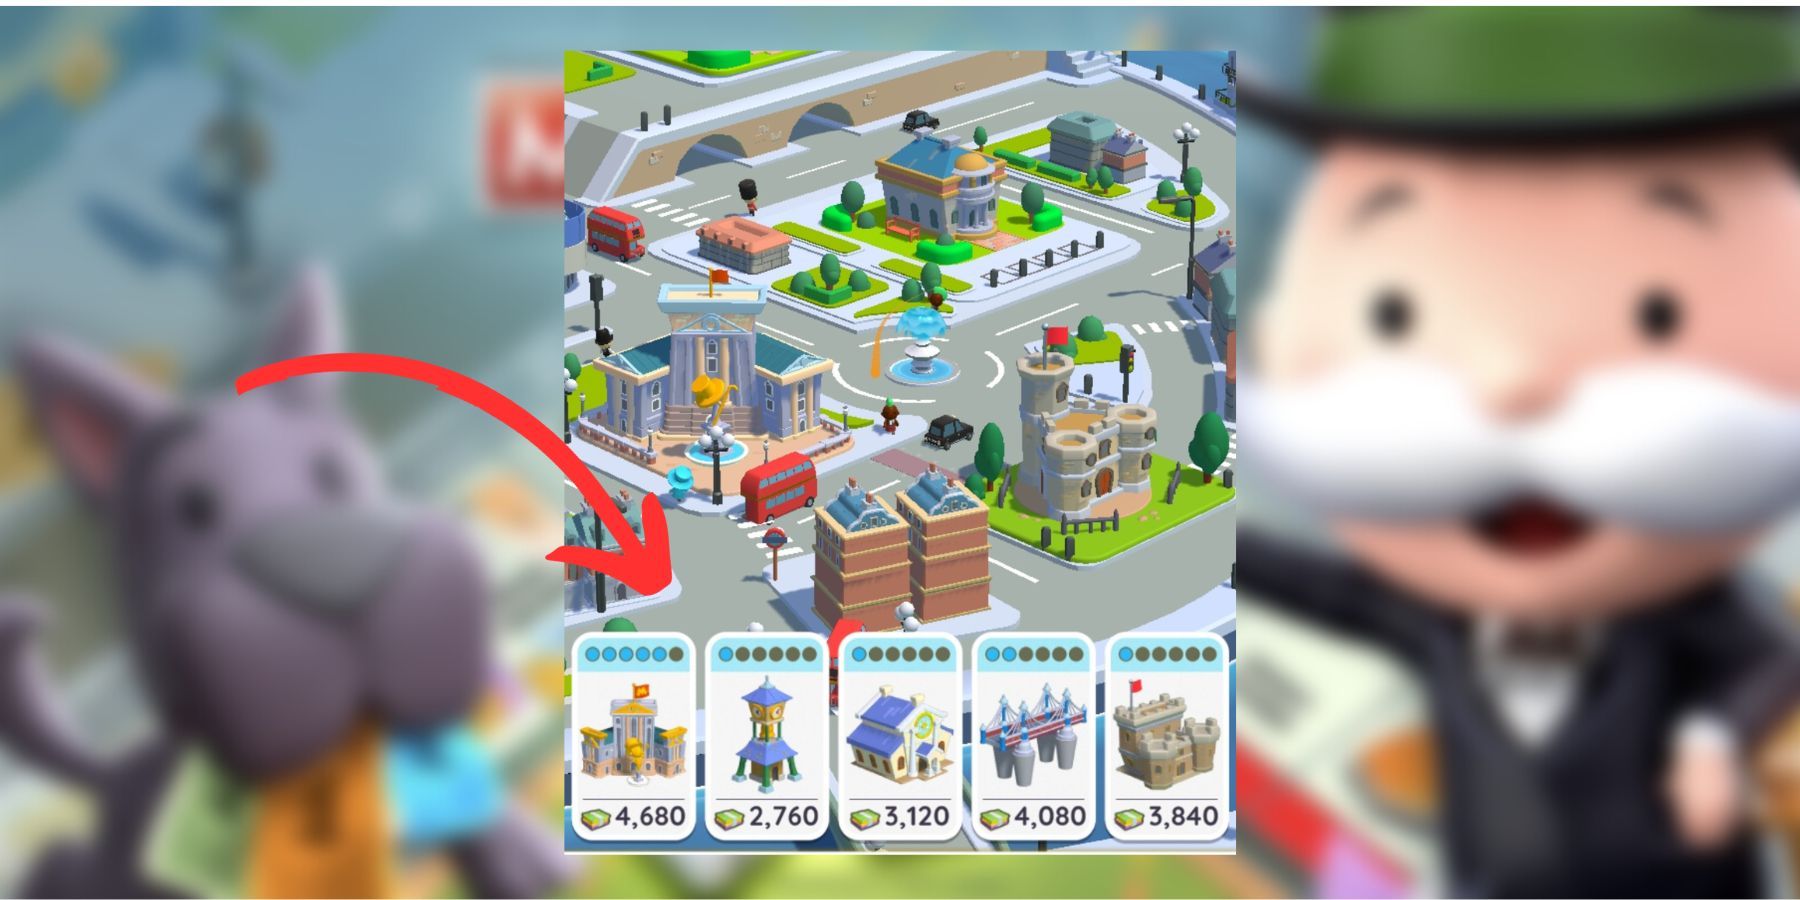 how to upgrade buildings to increase the net worth level in monopoly go.